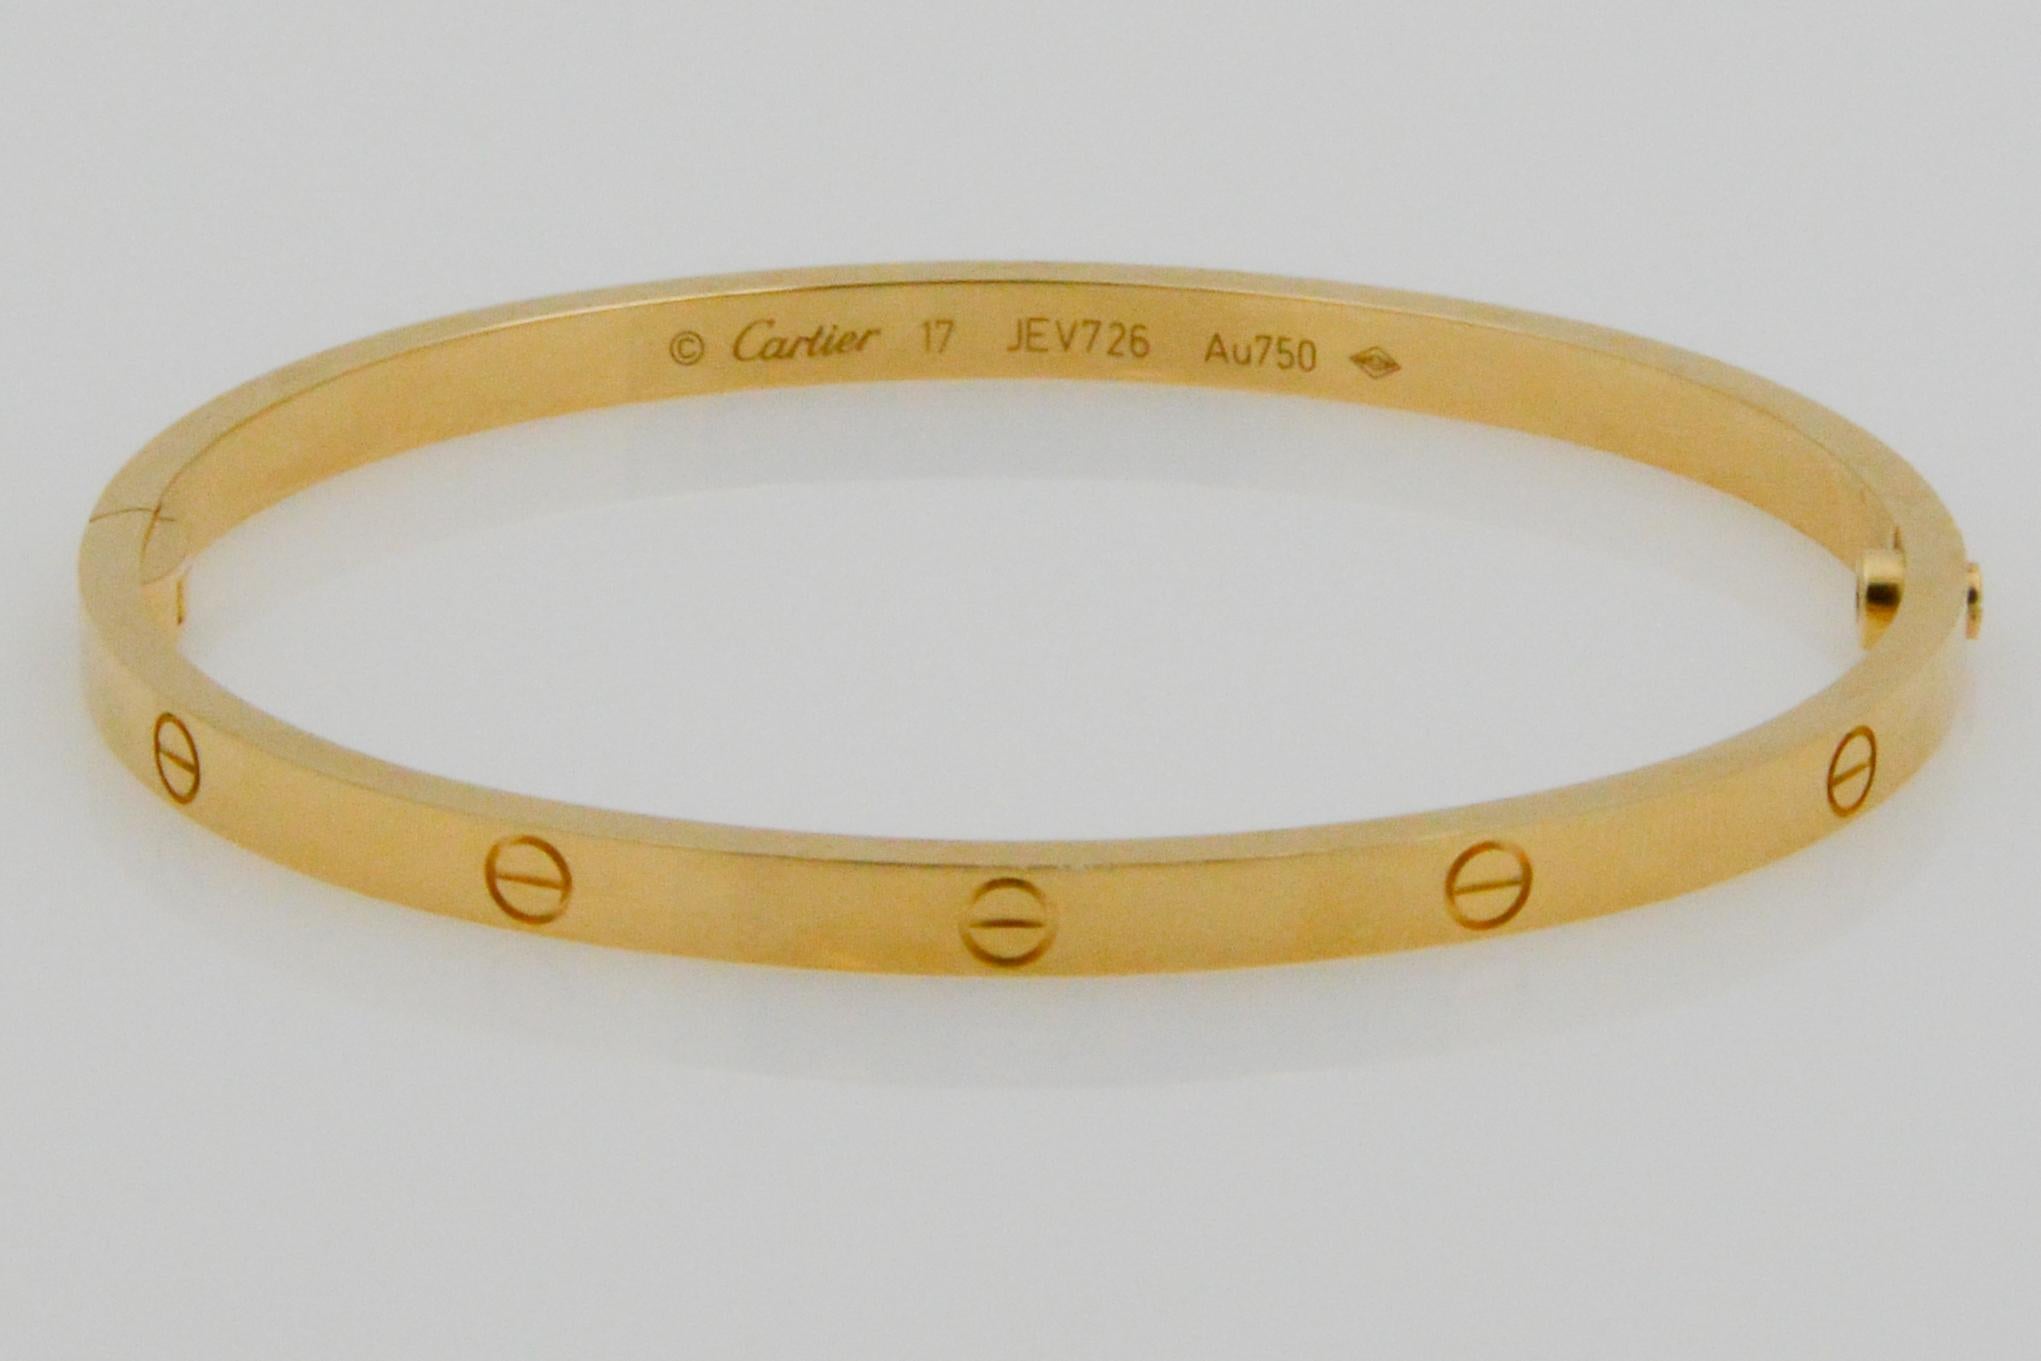 From Cartier, comes the signature Love bracelet in a small 18k yellow gold model. The bracelet is sold with the box and screwdriver
